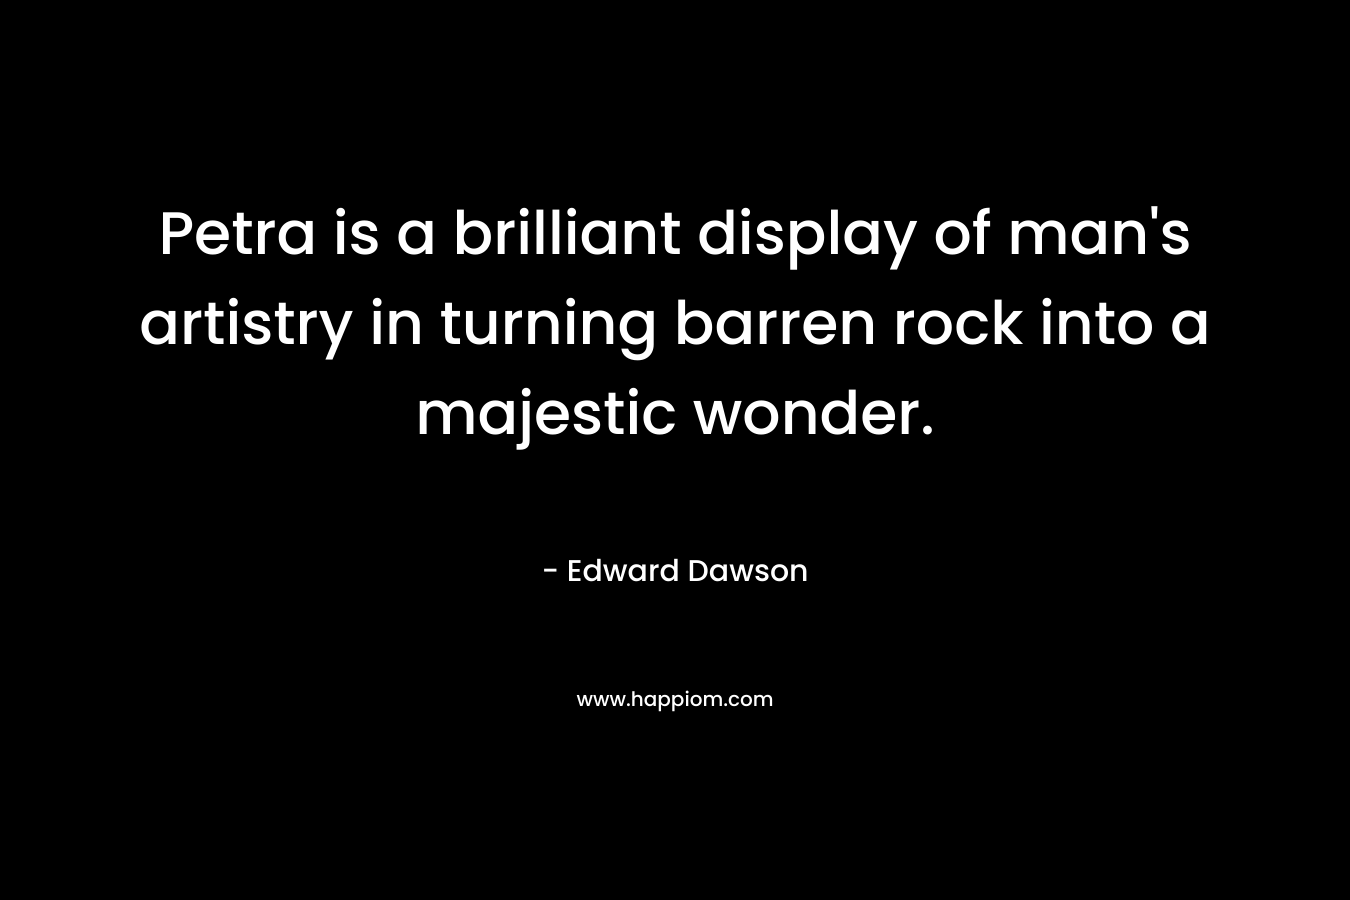 Petra is a brilliant display of man’s artistry in turning barren rock into a majestic wonder. – Edward Dawson